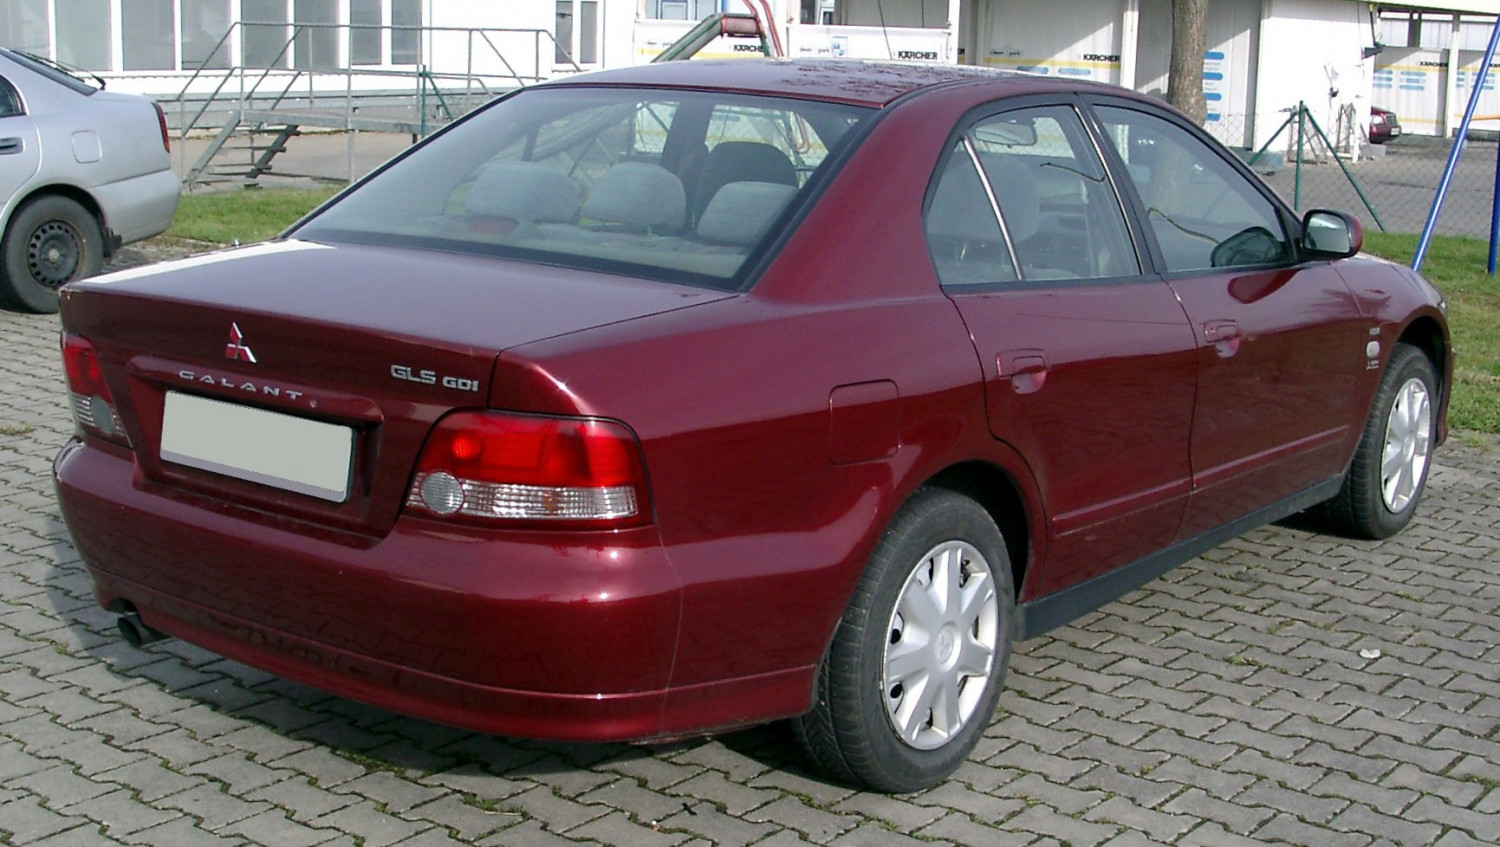 Example of a Galant 8